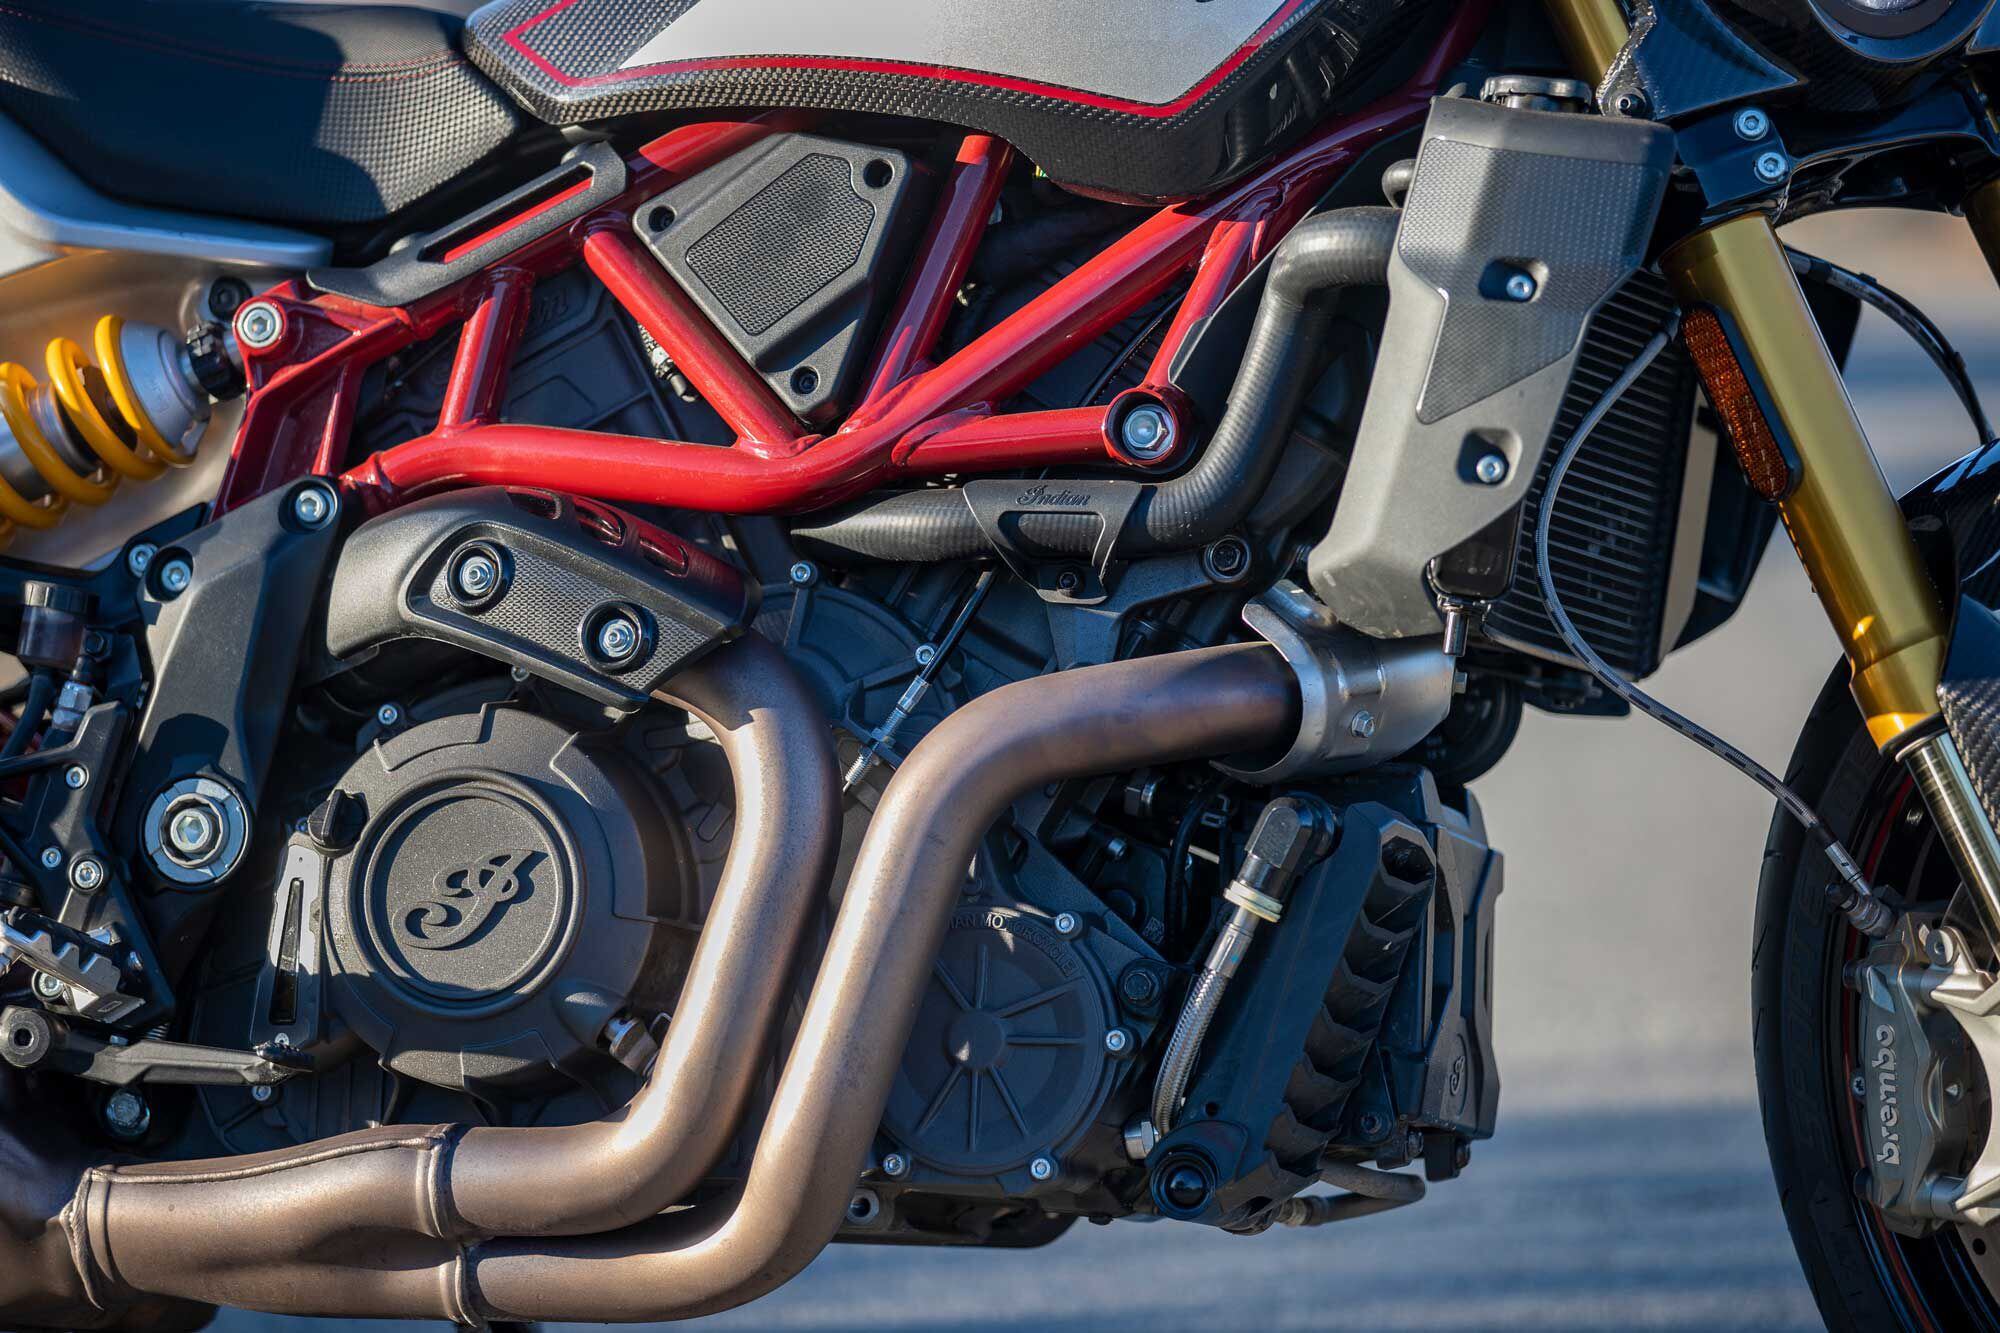 The FTR R Carbon is powered by a 1,203cc 60-degree V-twin that pumps out nearly 81 pound-feet torque. It delivers ‘oomph with a pleasing character reminiscent of Ducati’s old school L-Twins.